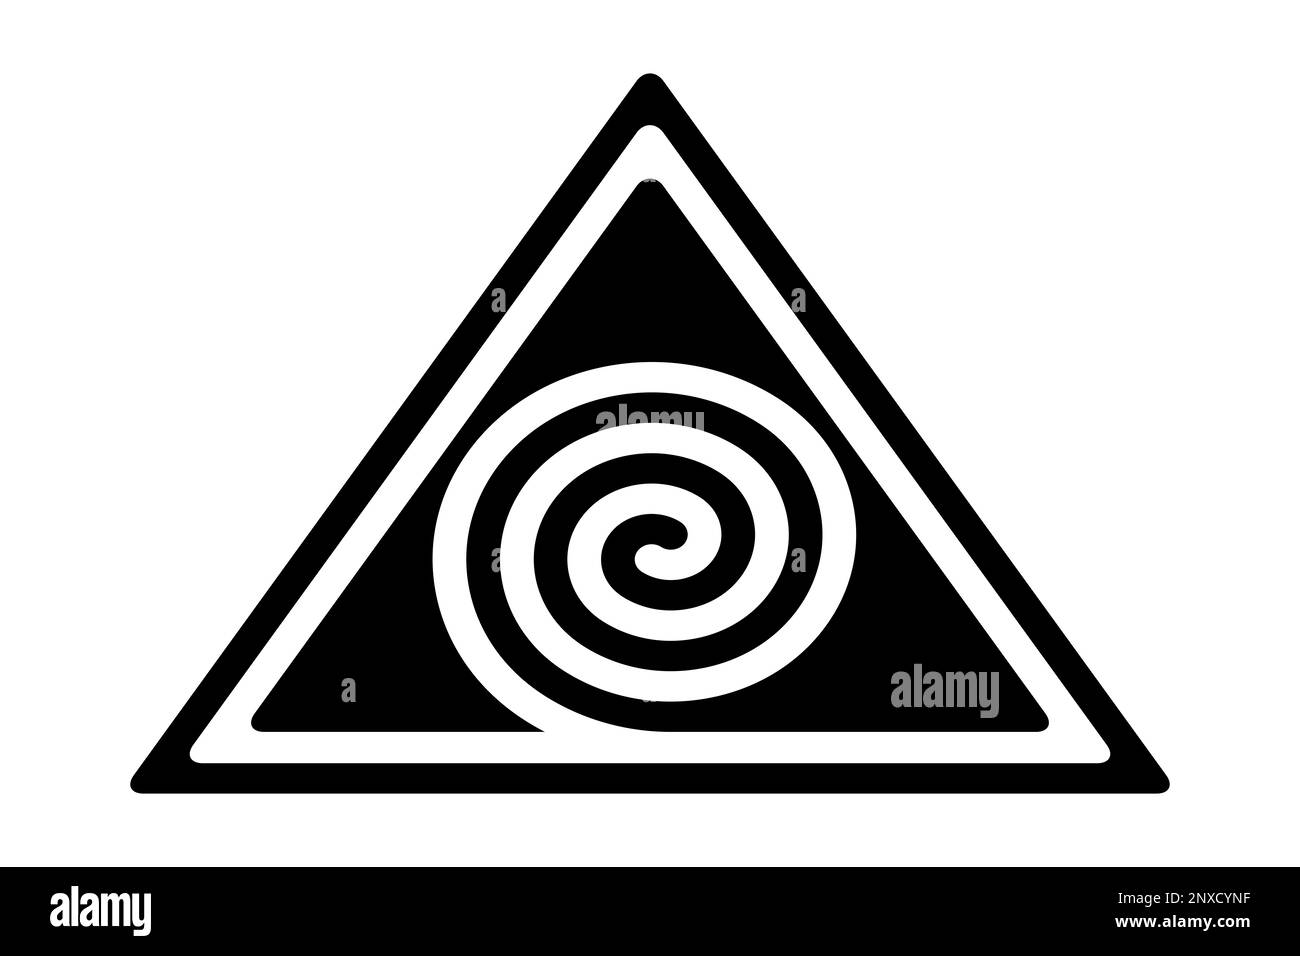 Two spirals in three triangles, a Hopi symbol. A black spiral forming a triangle, creating the optical illusion of a white spiral. Stock Photo